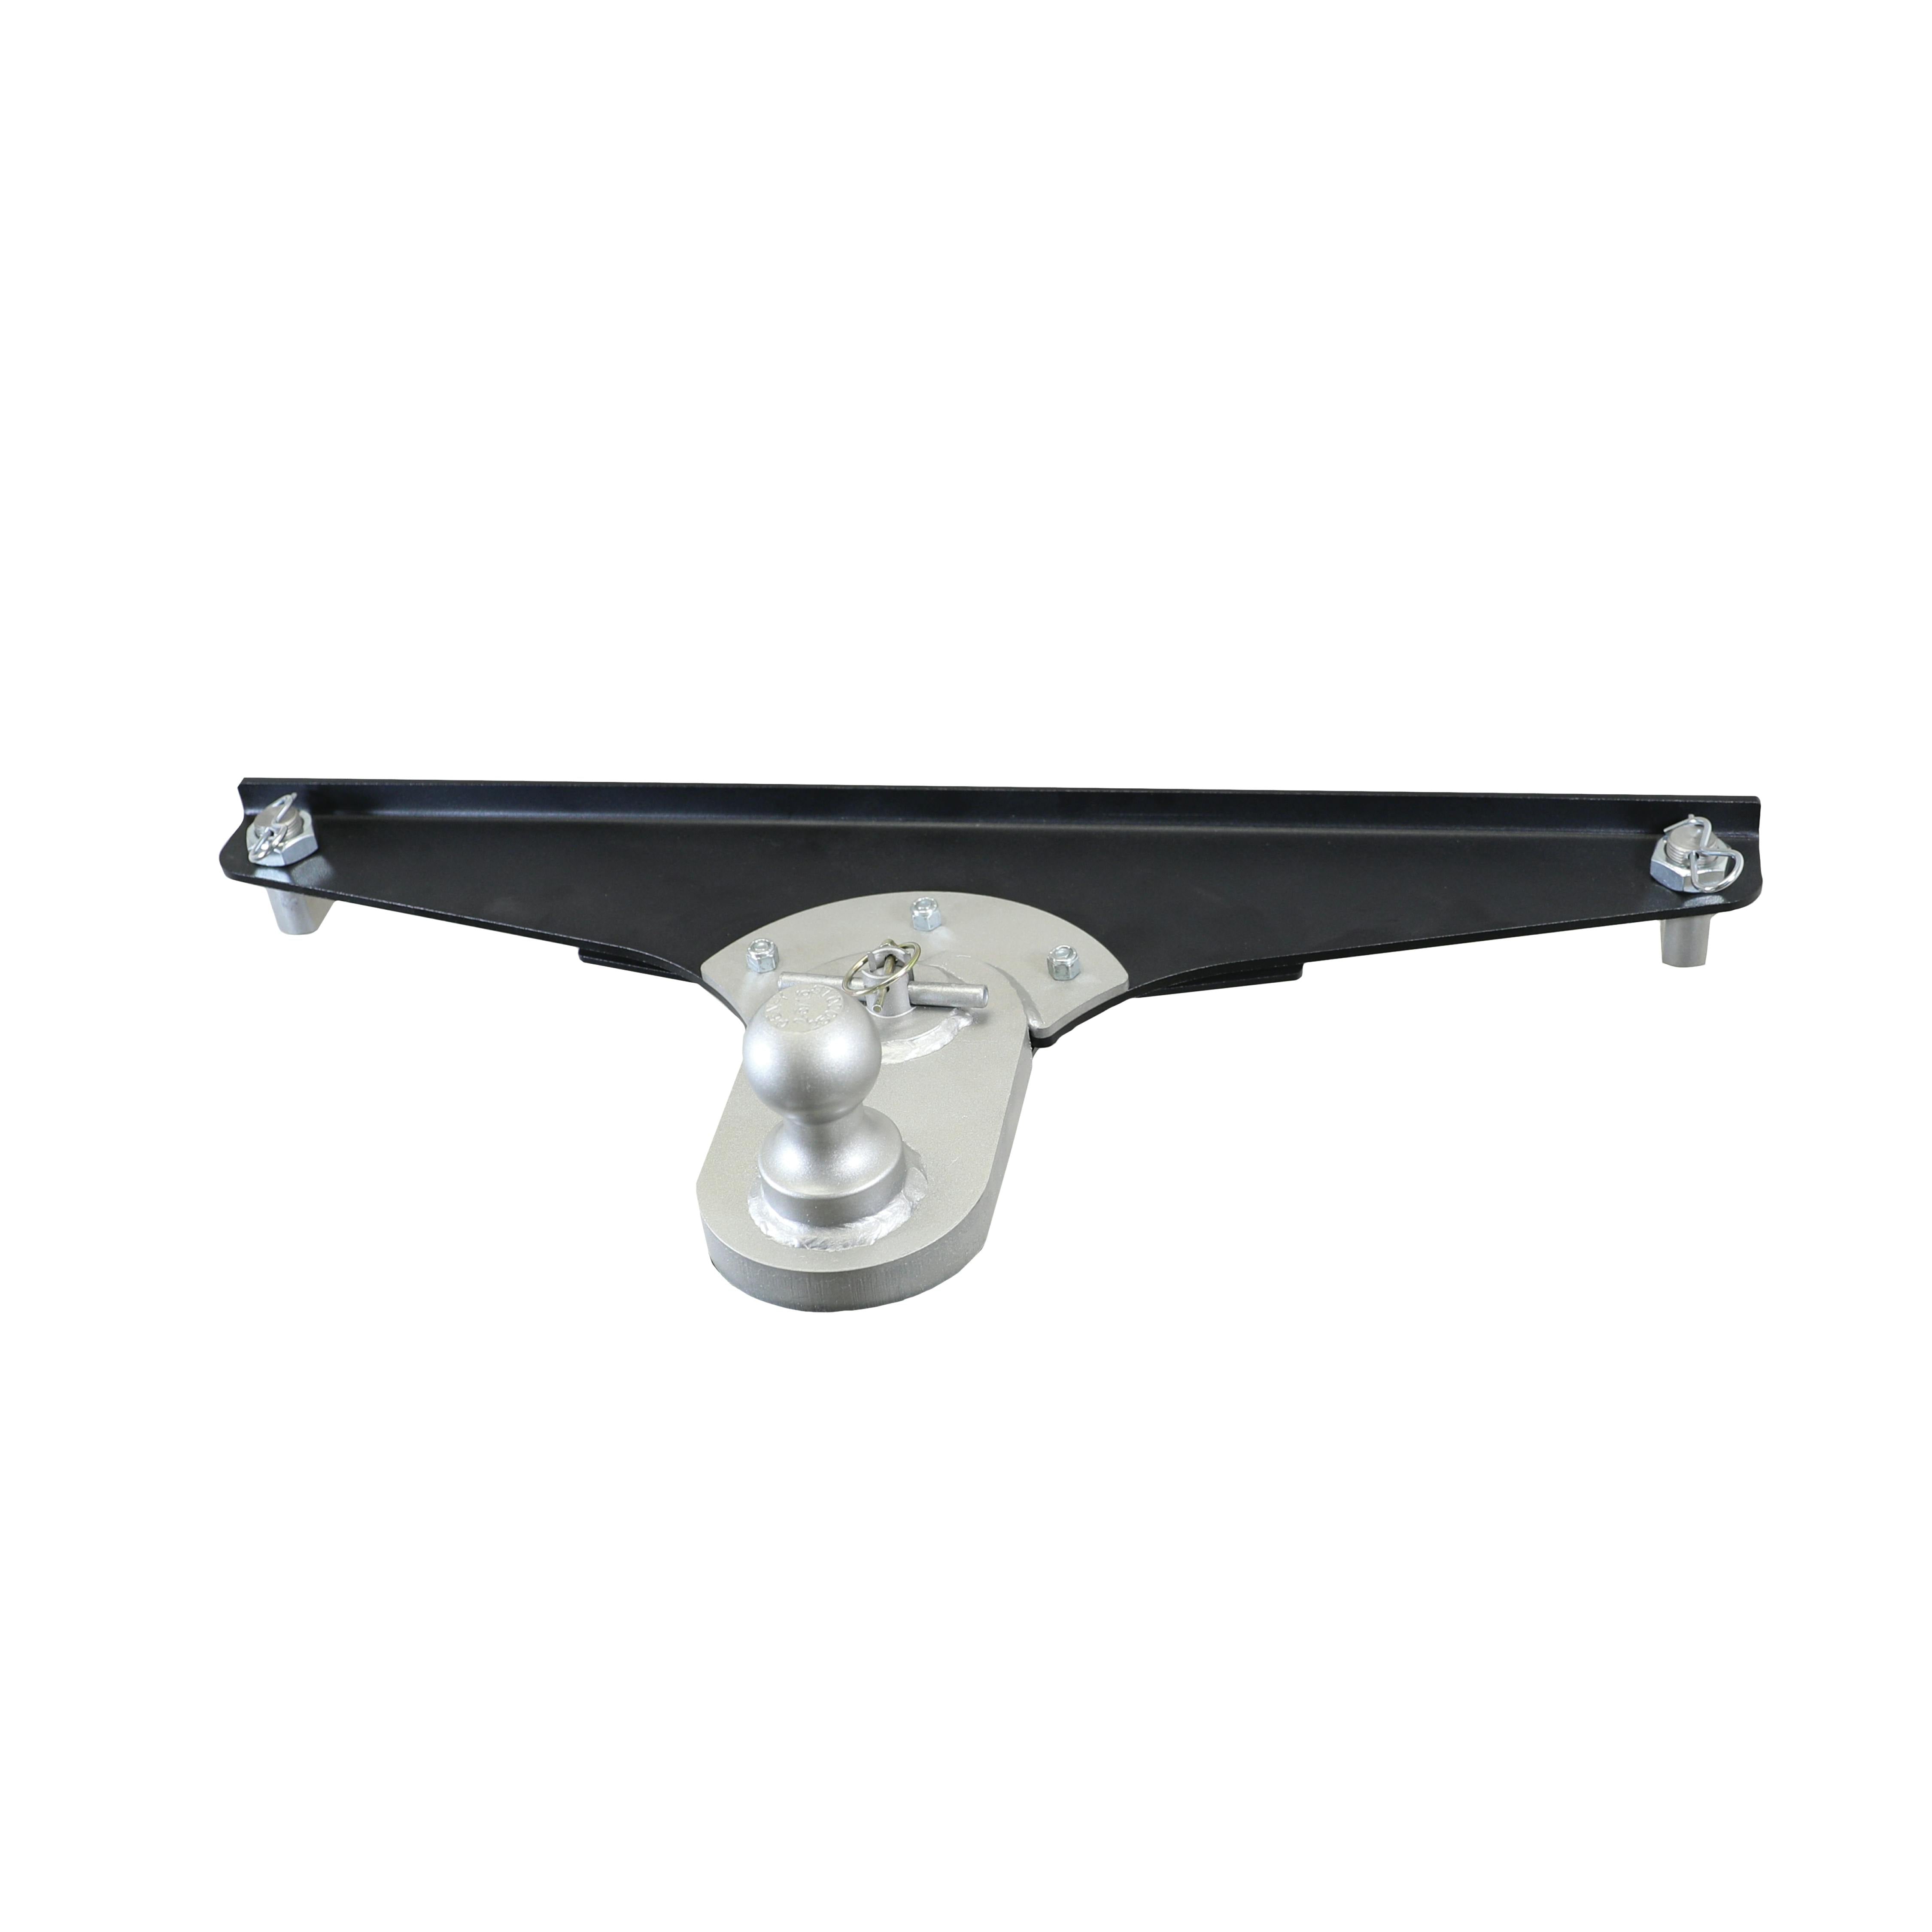 GEN-Y Hitch GH-21002 GoosePuck 5in offset ball-puck mount for GM Long Bed 2019 25K Towing